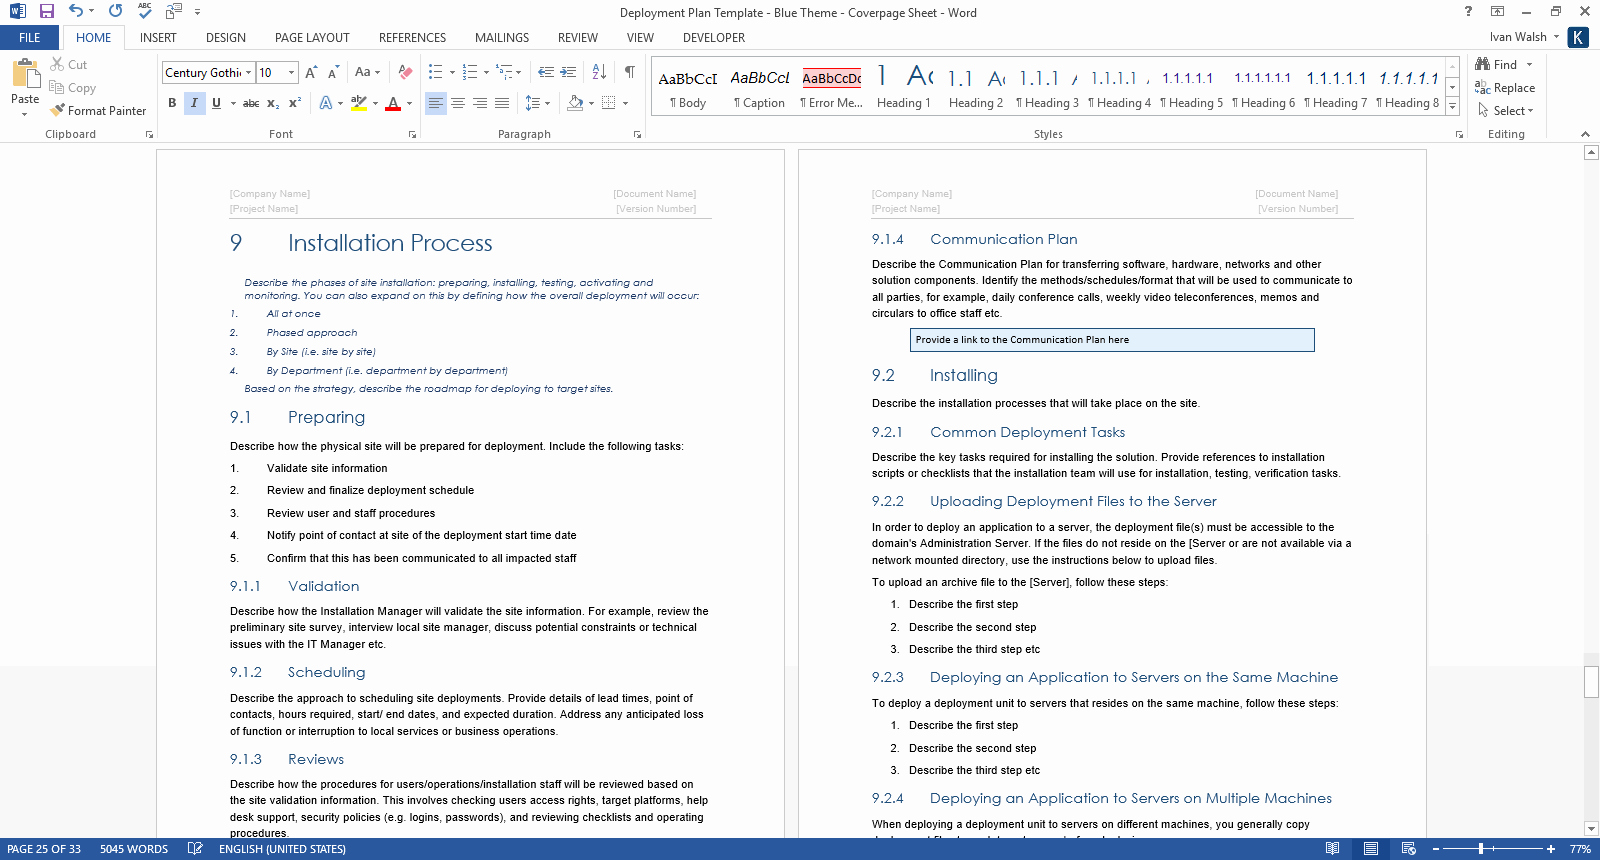 Project Rollout Plan Template Luxury Deployment Plan Template Ms Word – Templates forms